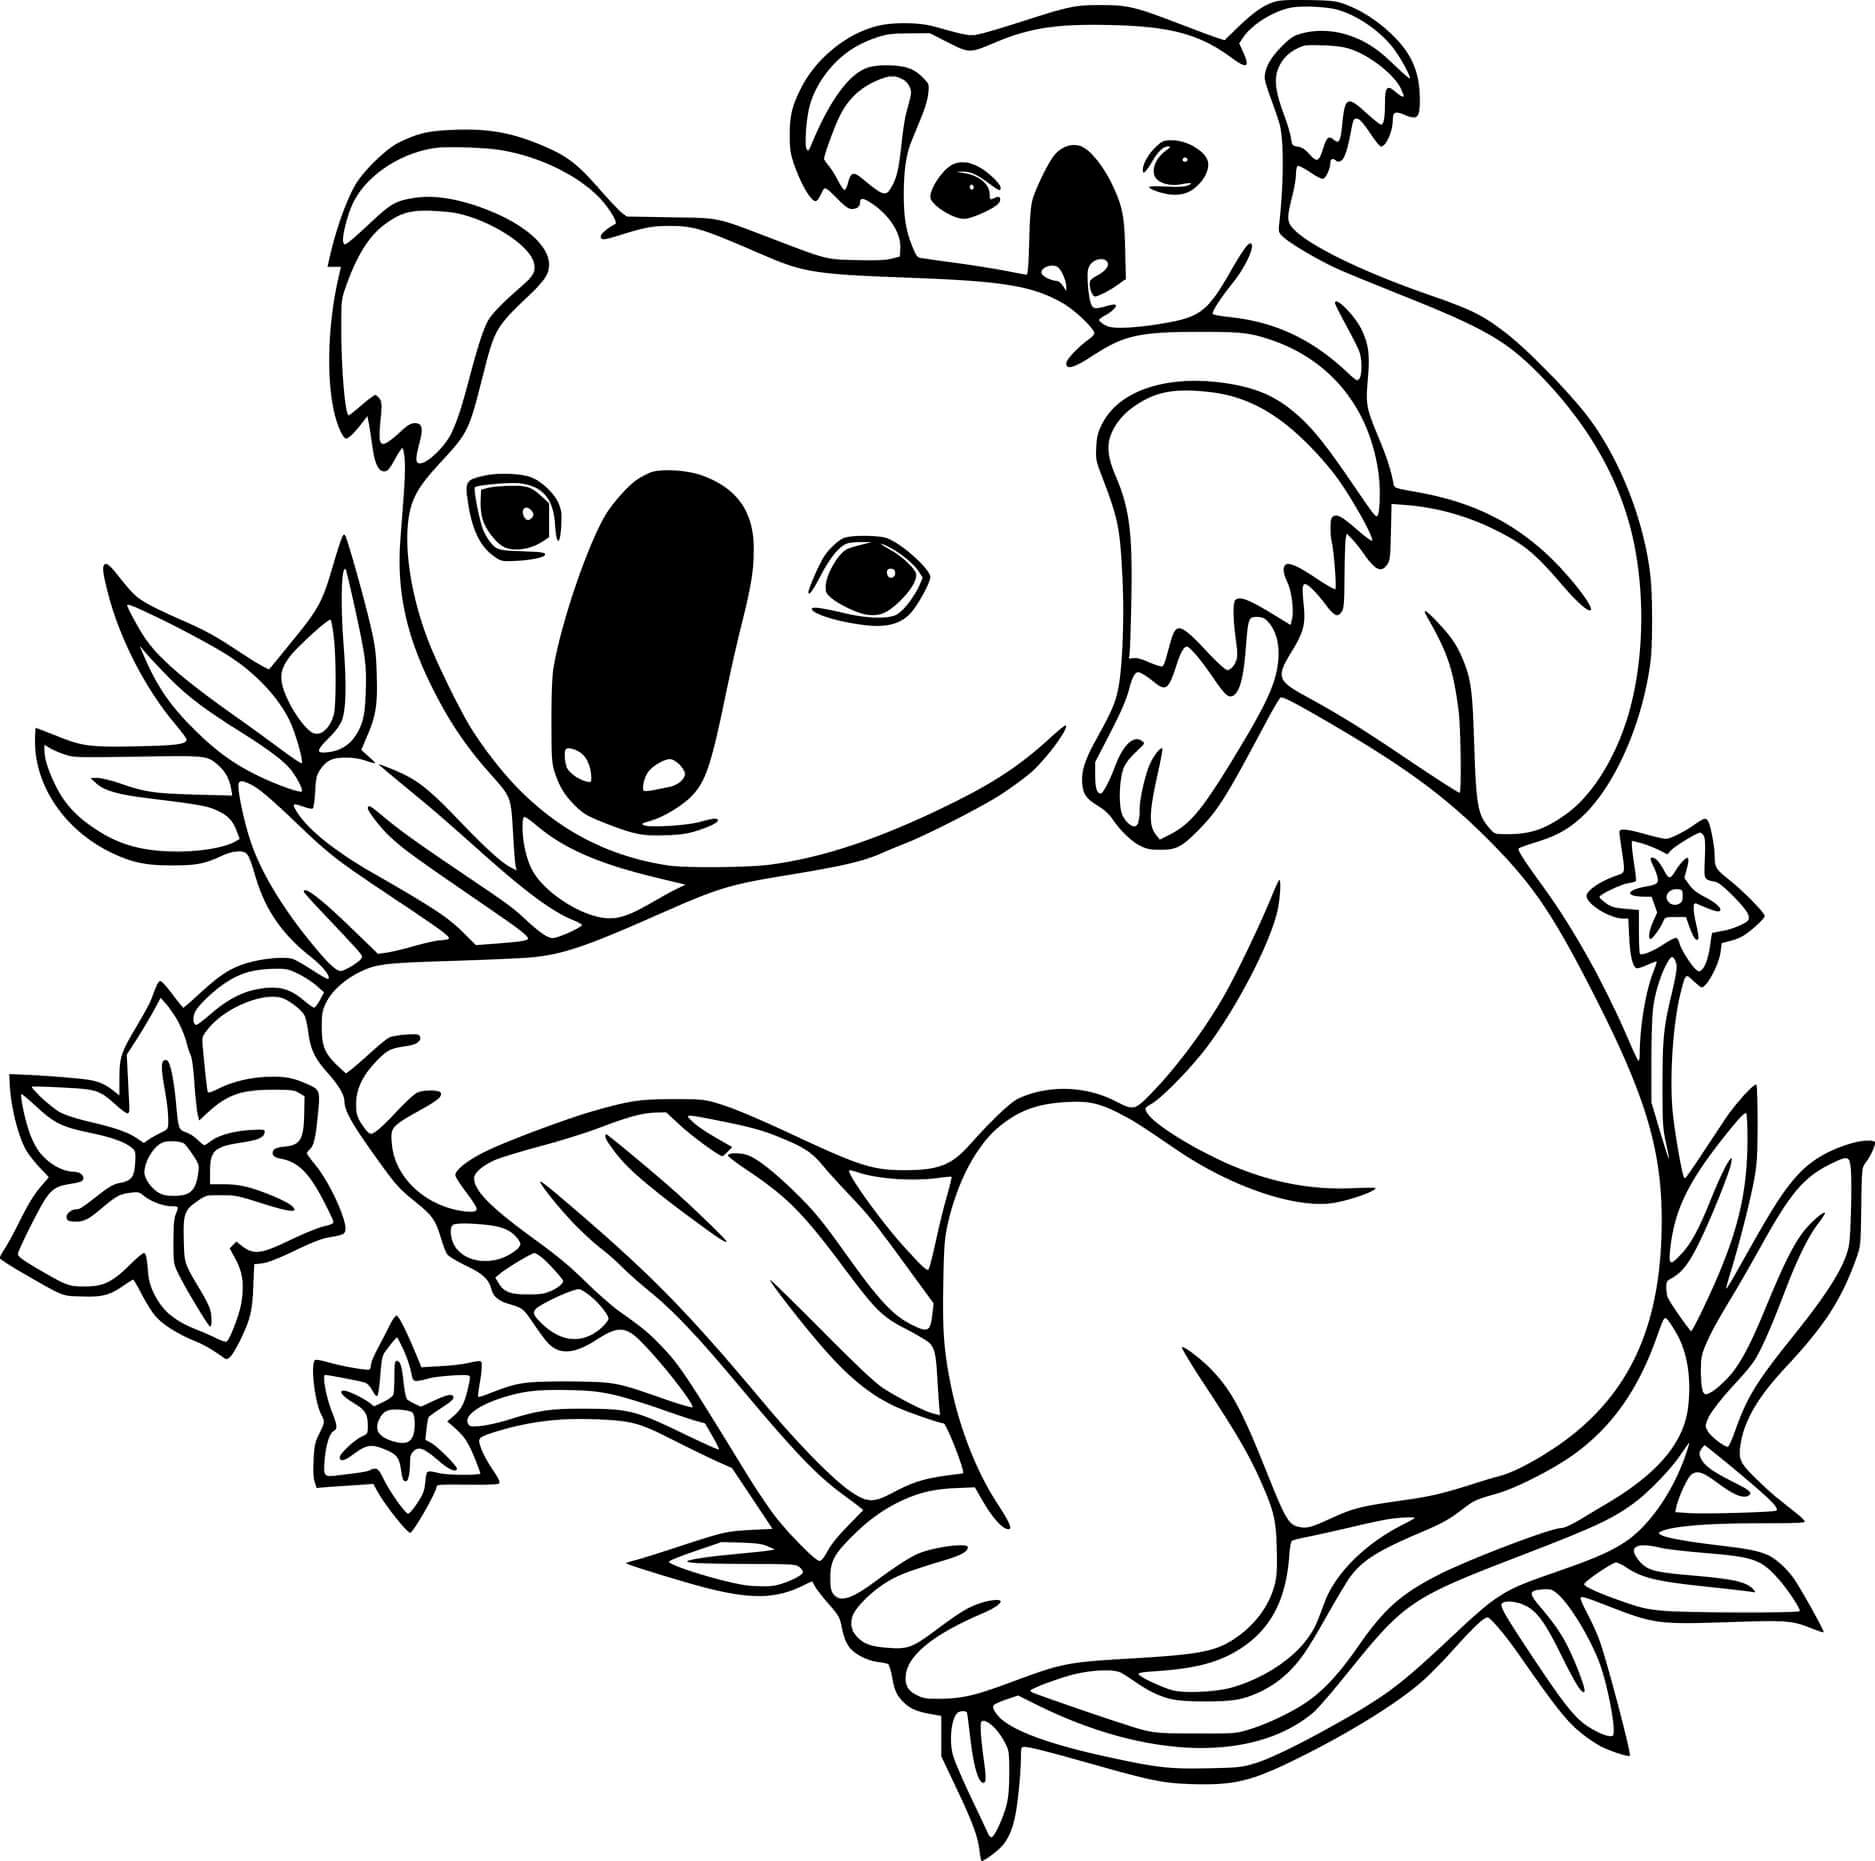 Cartoon Koala And Baby Coloring Pages   Coloring Cool